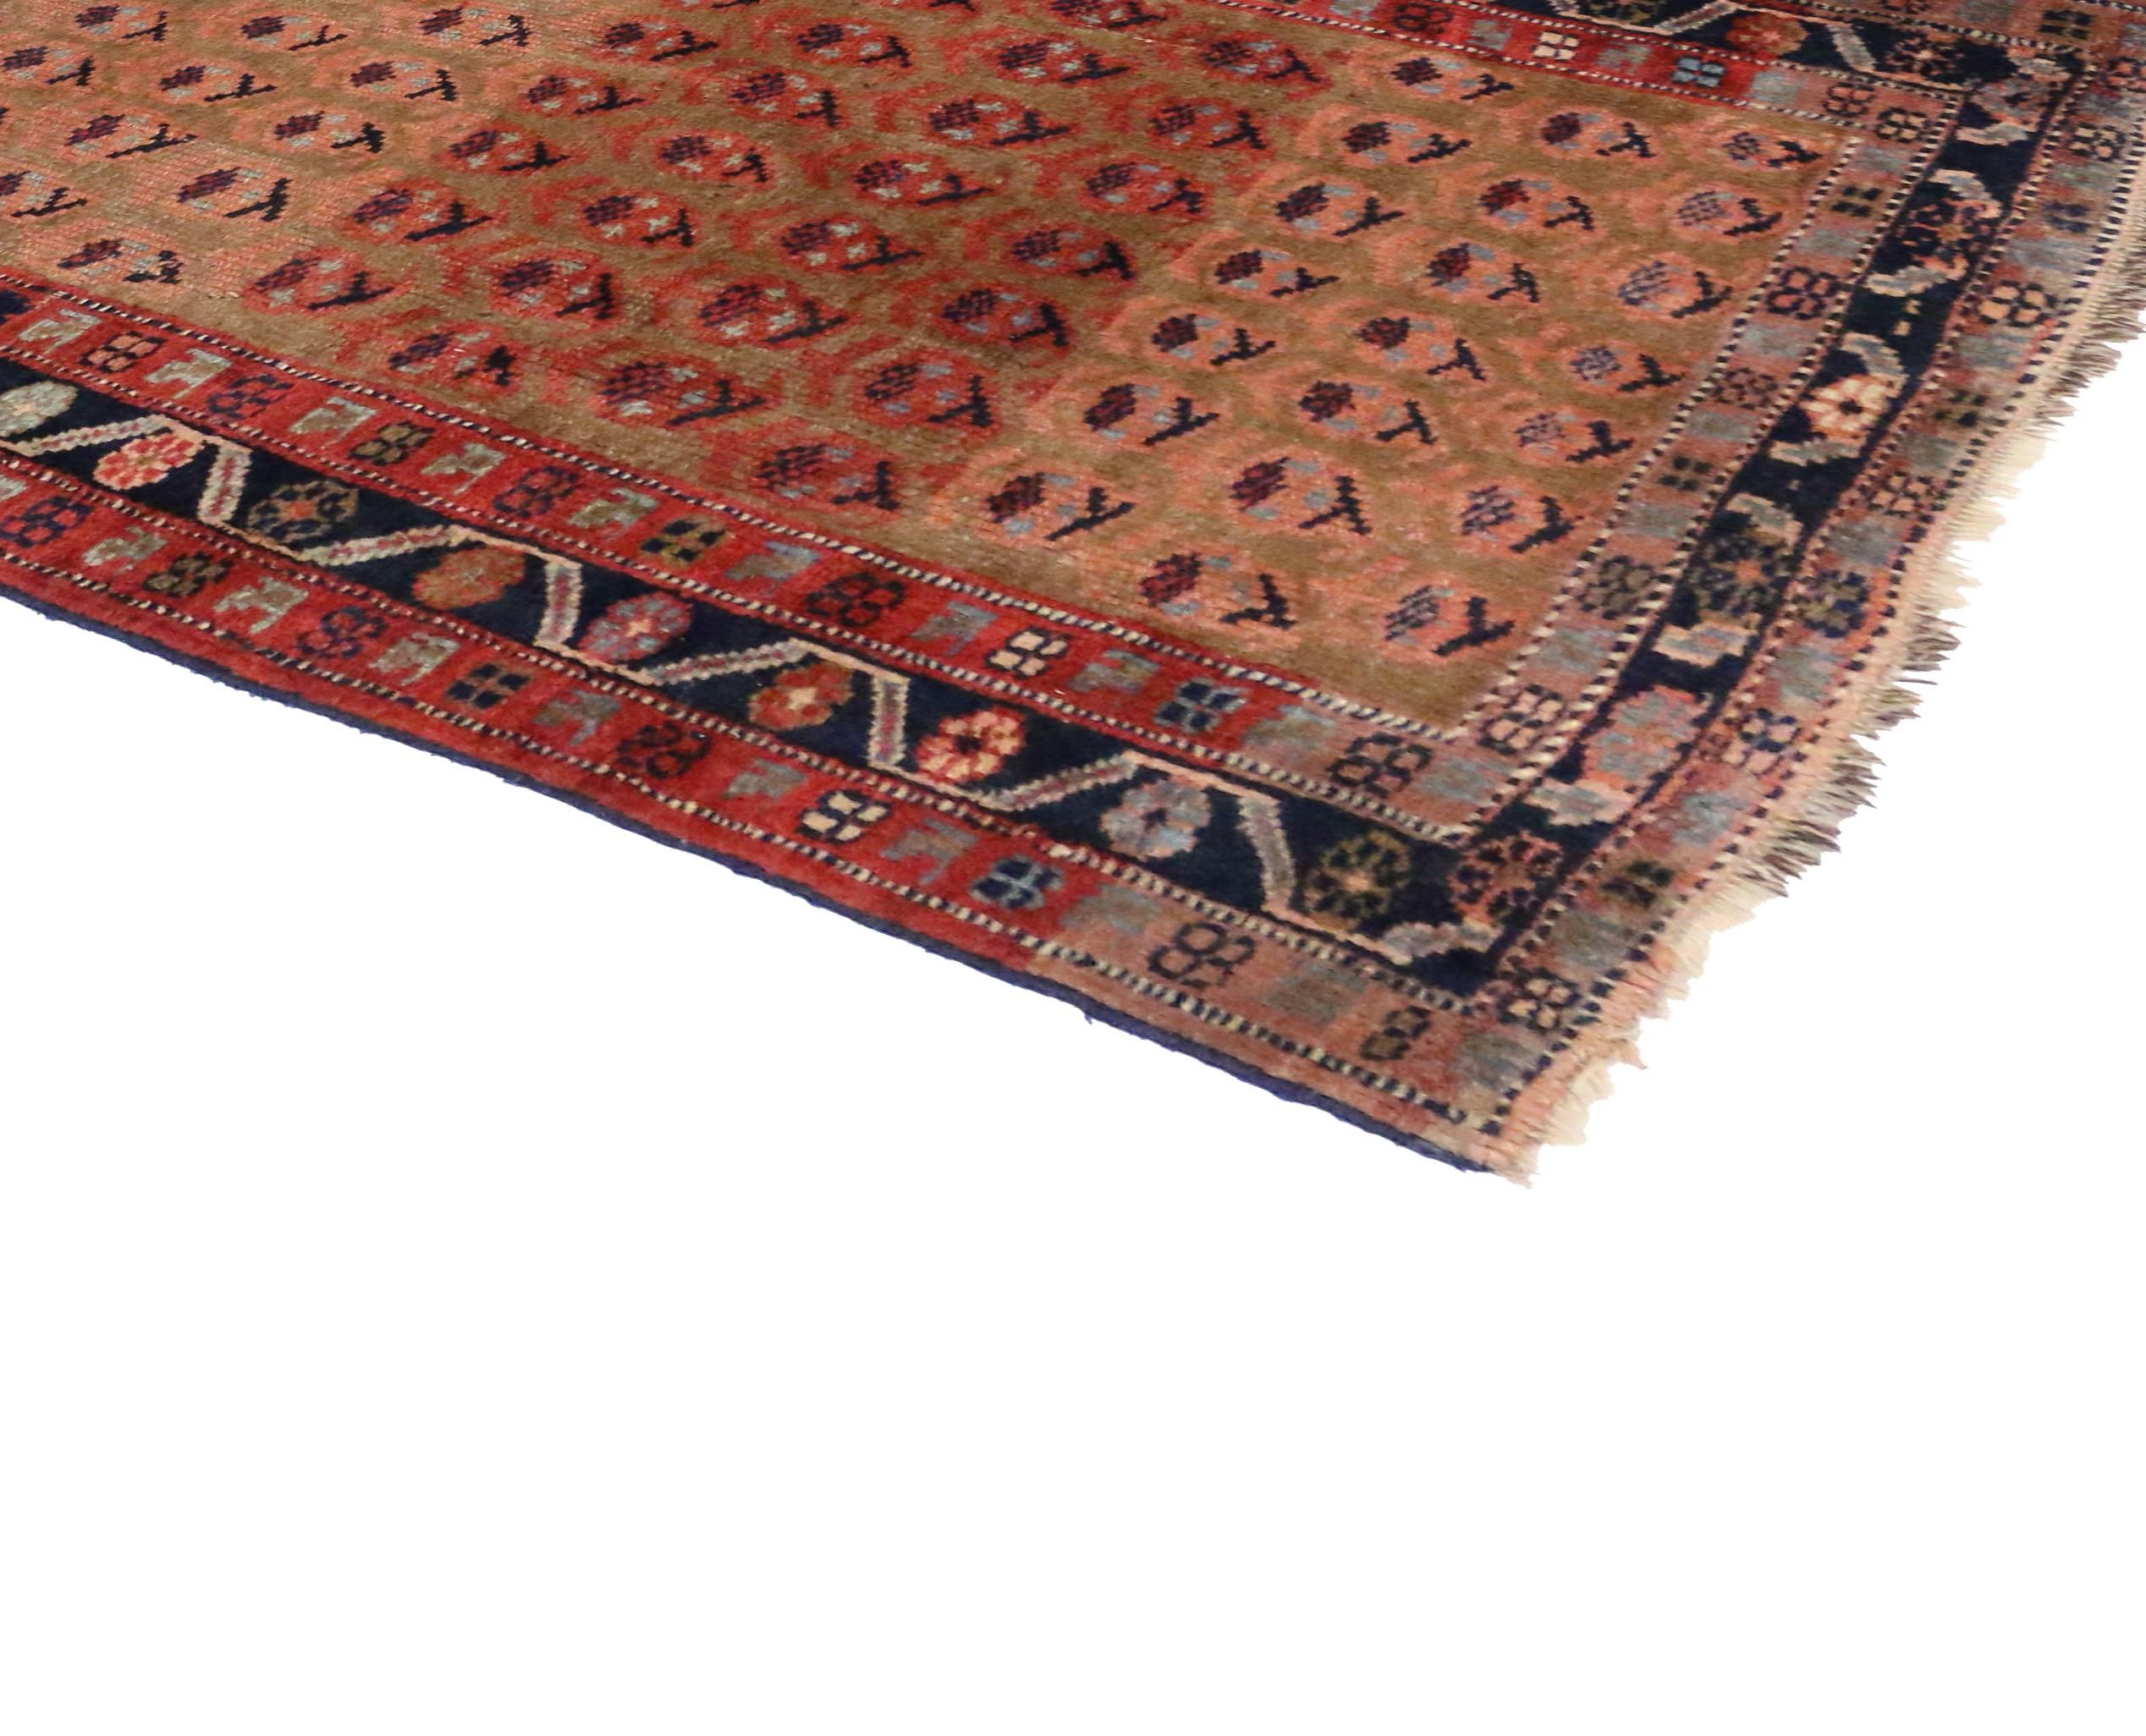 Delicate yet bold, this extravagant antique Persian Kurd carpet runner displays an all-over repetitive pattern of opulent boteh motifs. The boteh resembles sprouting seed and is known as the “Seed of Life.” It represents potential for growth and